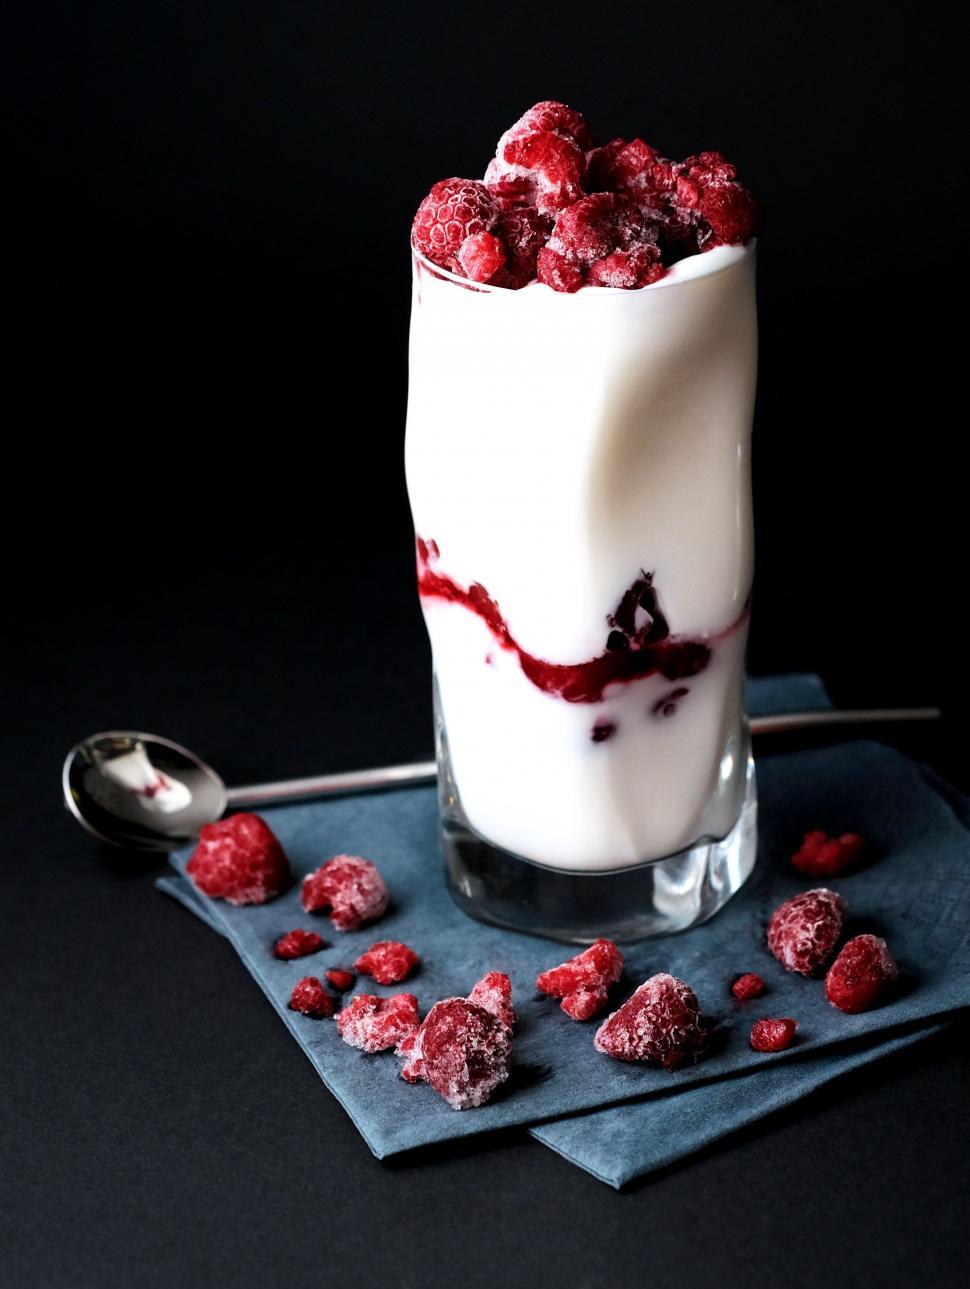 Free Image of Delicious Dessert With Fresh Raspberries 